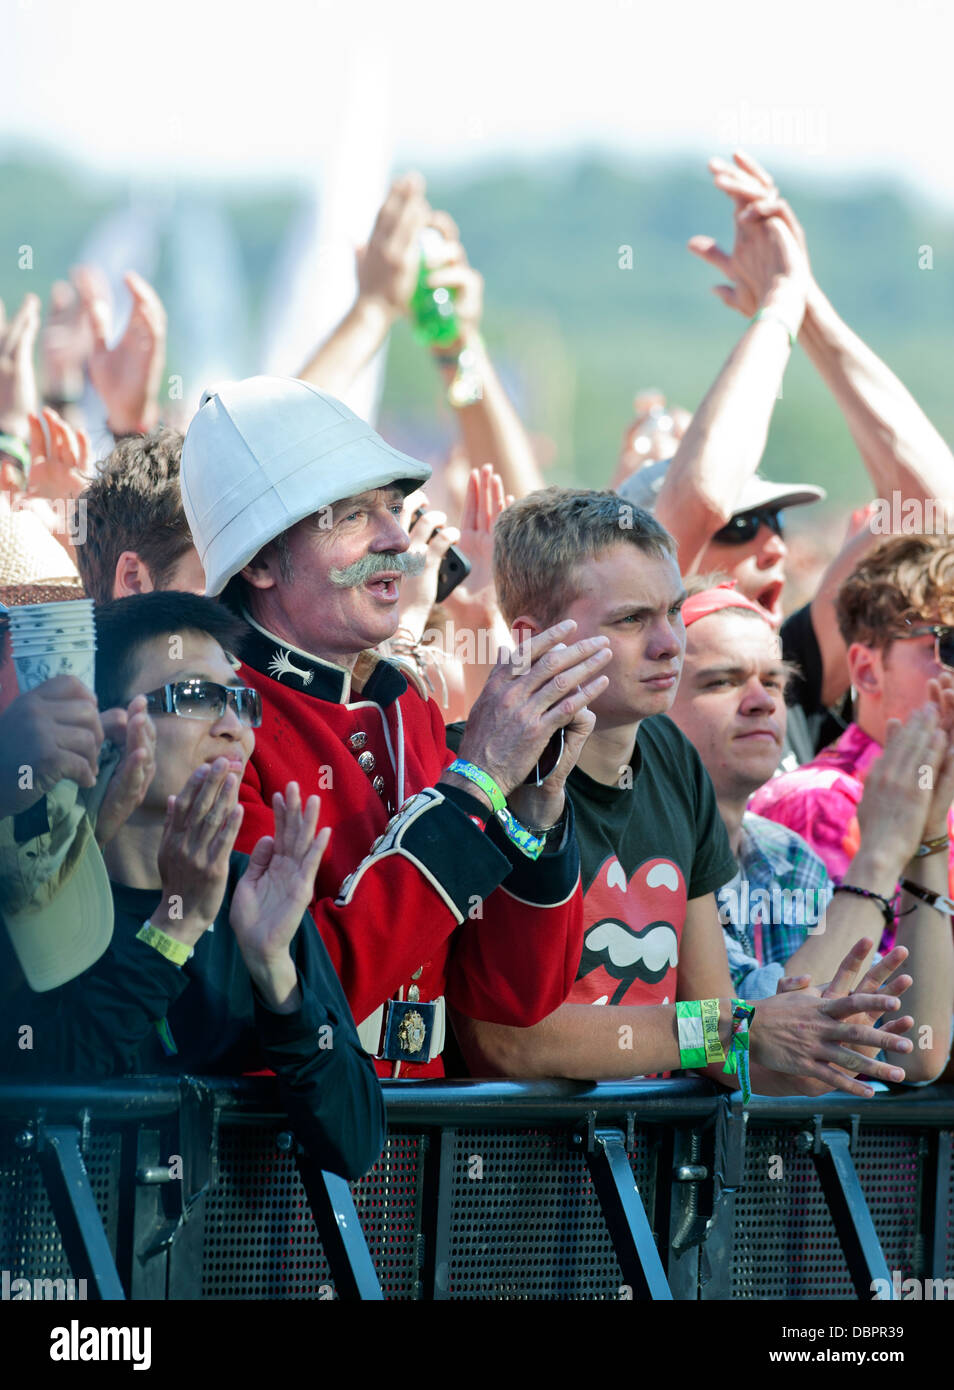 Female fans on the crowd barrier of a concert Stock Photos and Images